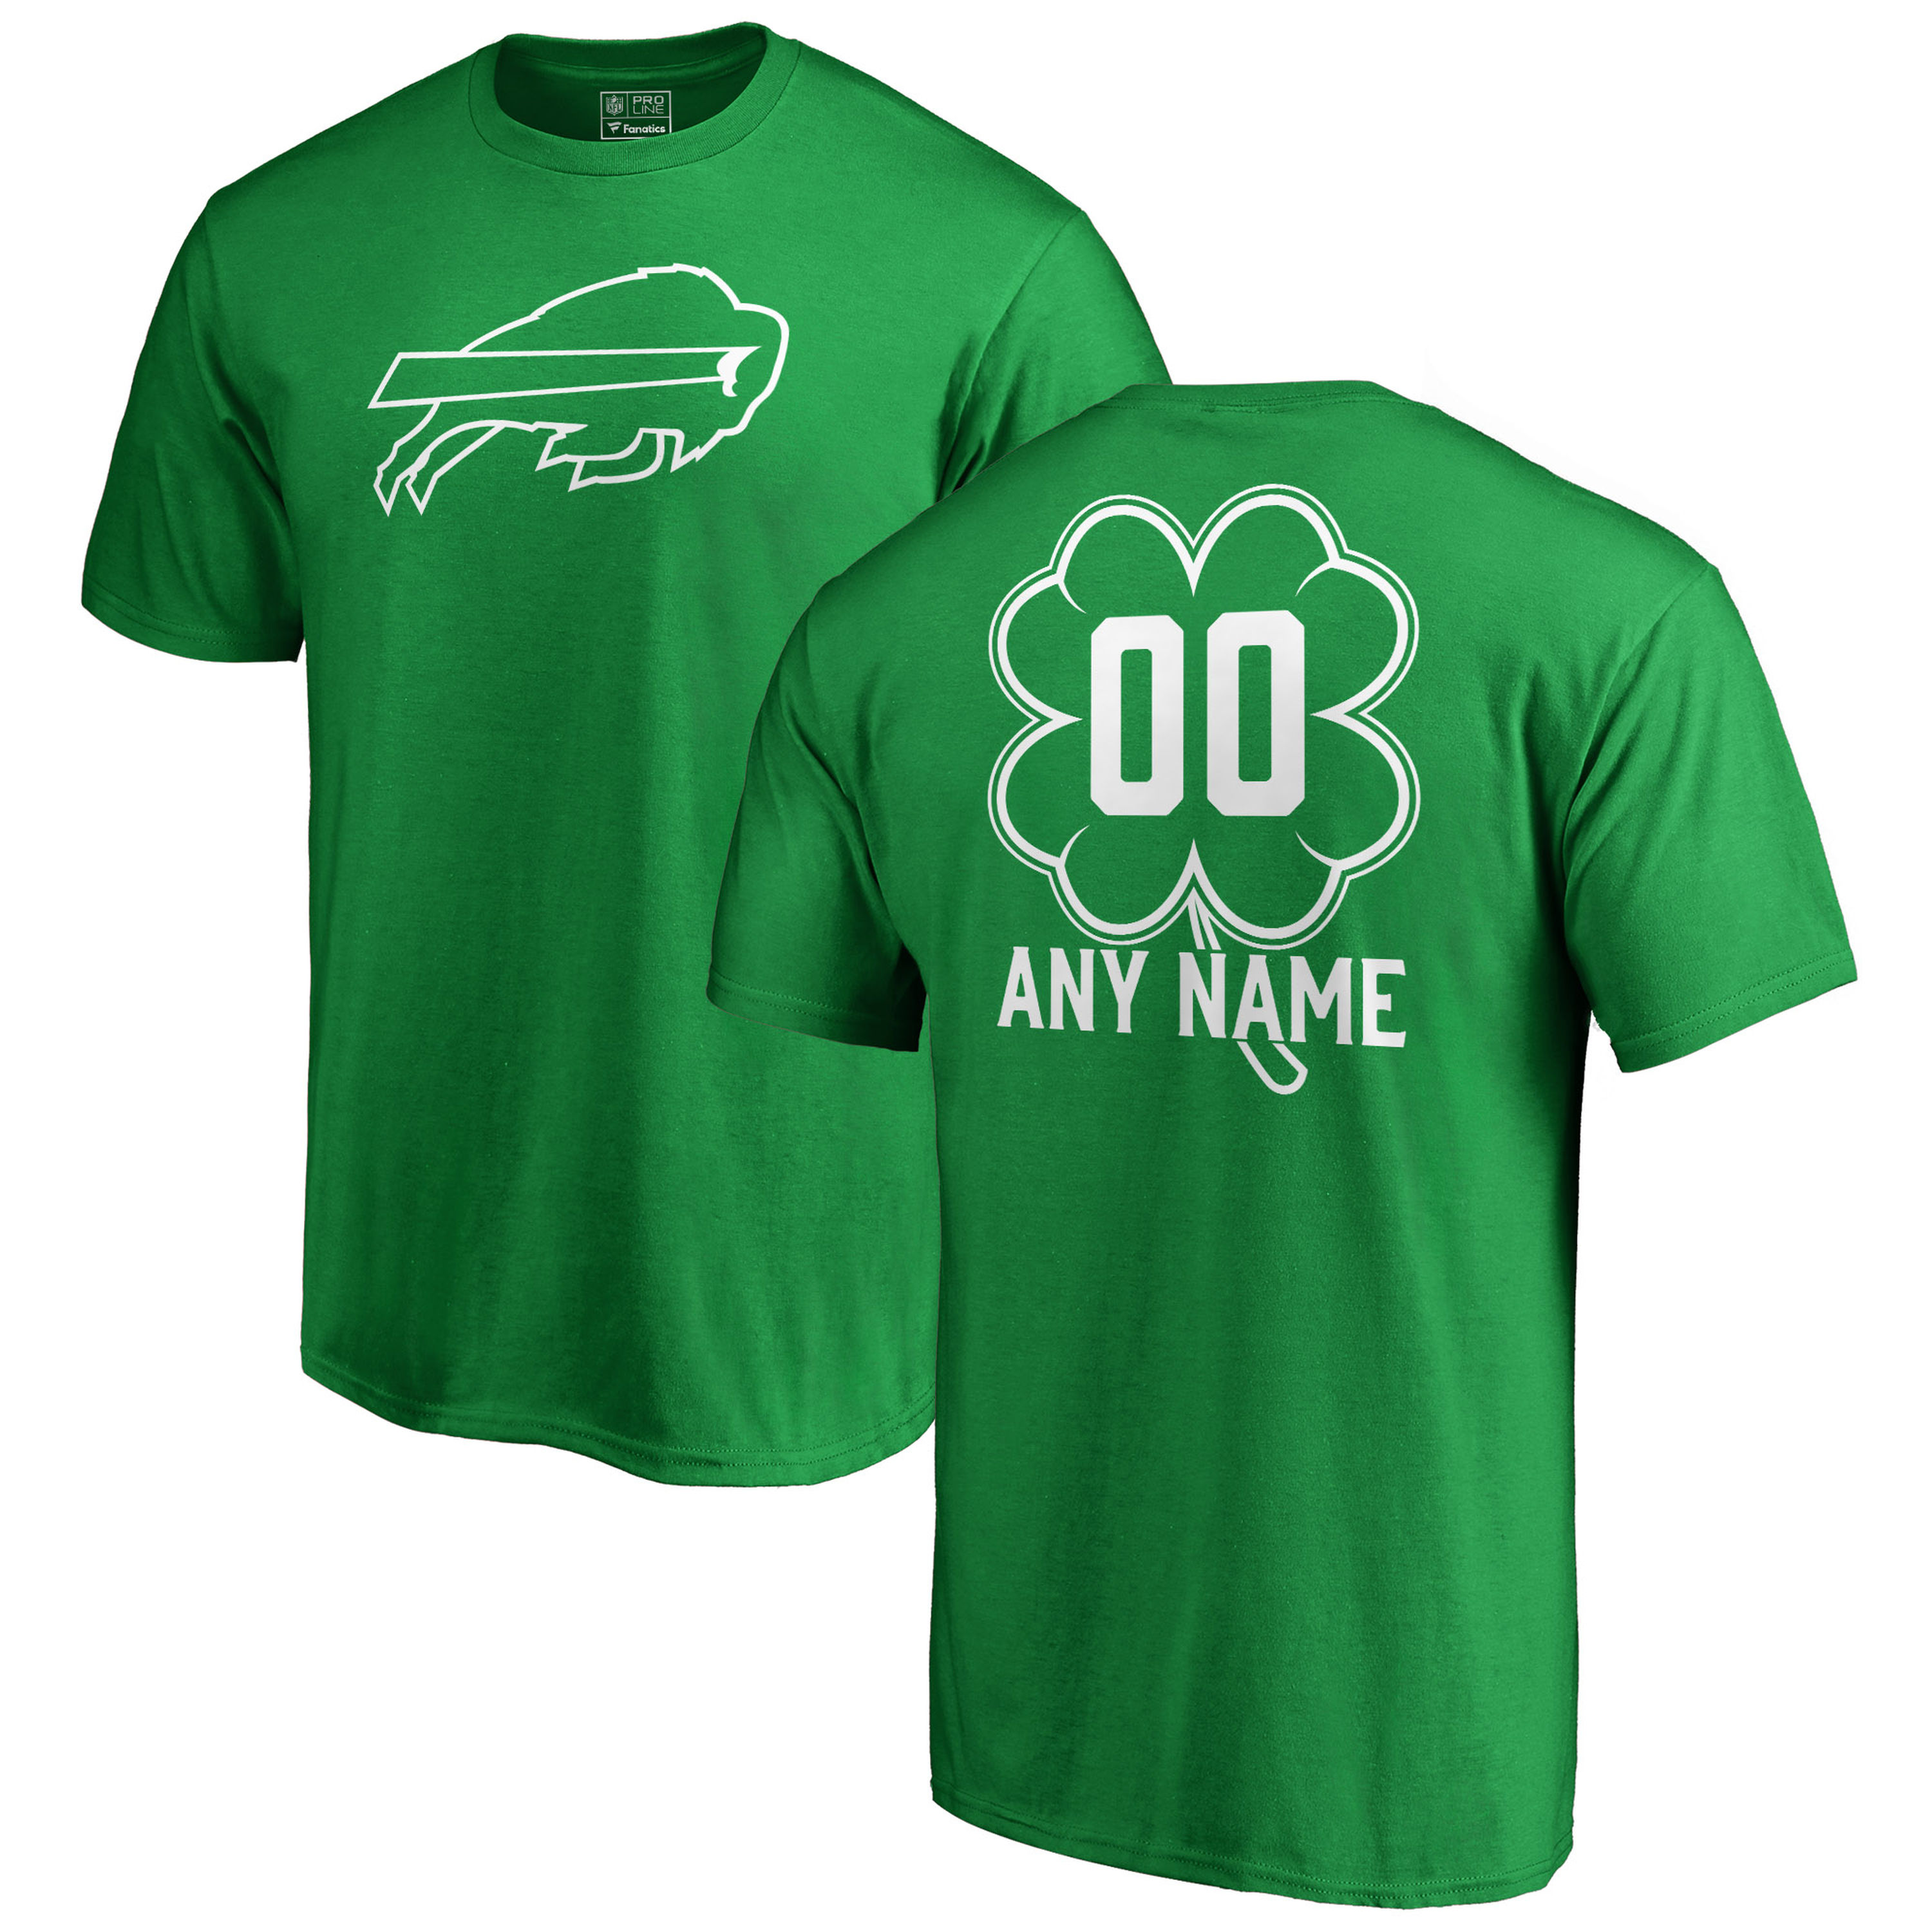 Men's Buffalo Bills NFL Pro Line by Fanatics Branded Kelly Green St. Patrick's Day Personalized Name & Number T-Shirt (Check description if you want Women or Youth size)